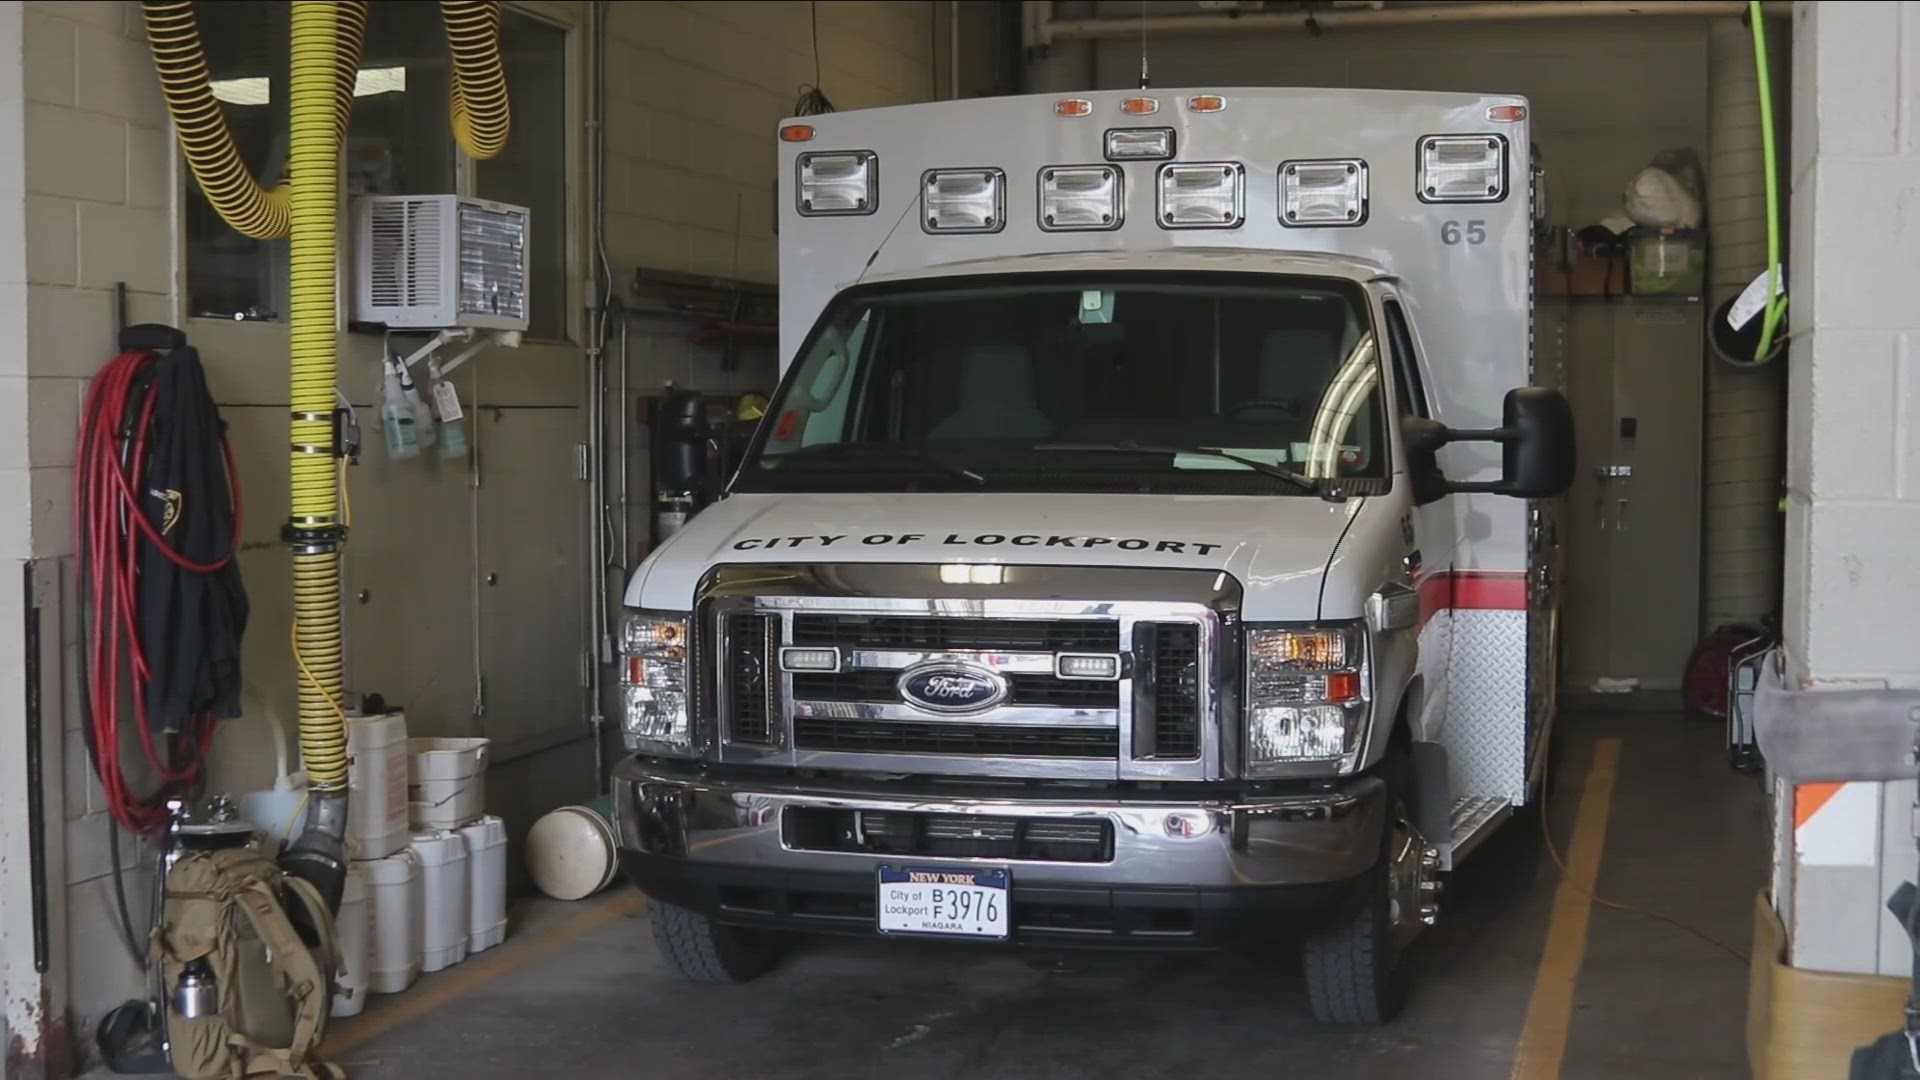 A lawsuit alleges that the vote to restart the Lockport ambulance service was illegal